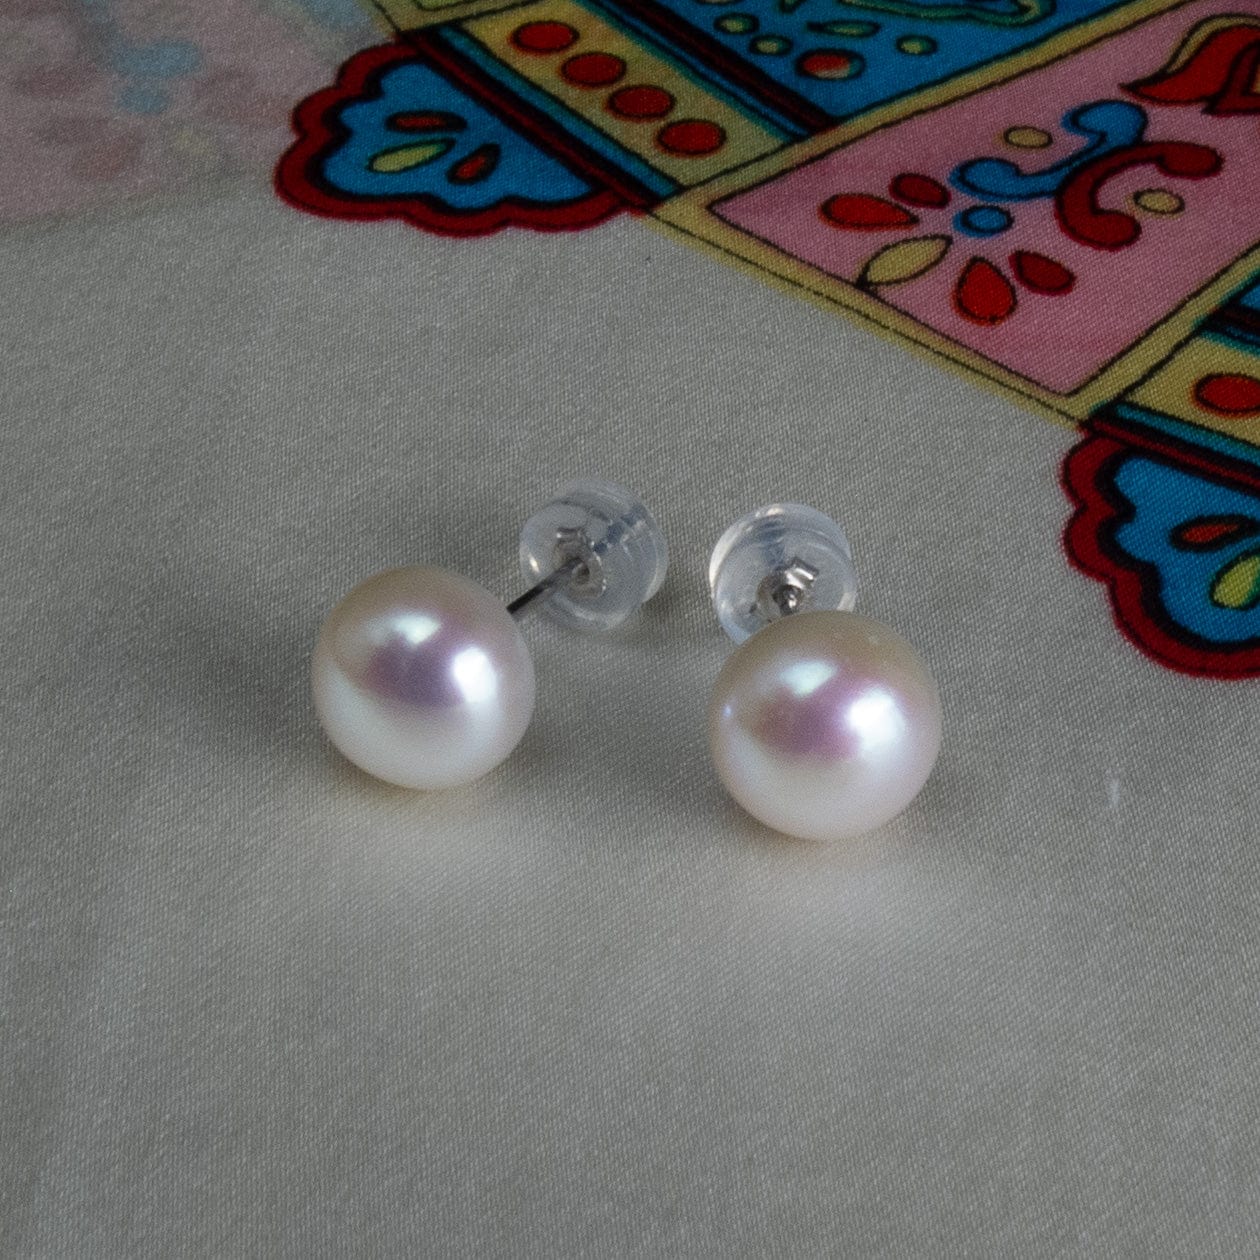 Arbor Trading Post Earrings Light Pink Handcrafted 8mm Freshwater Baroque Pearl Stud Earrings - 925 Sterling Silver, Light Pink or Light Purple